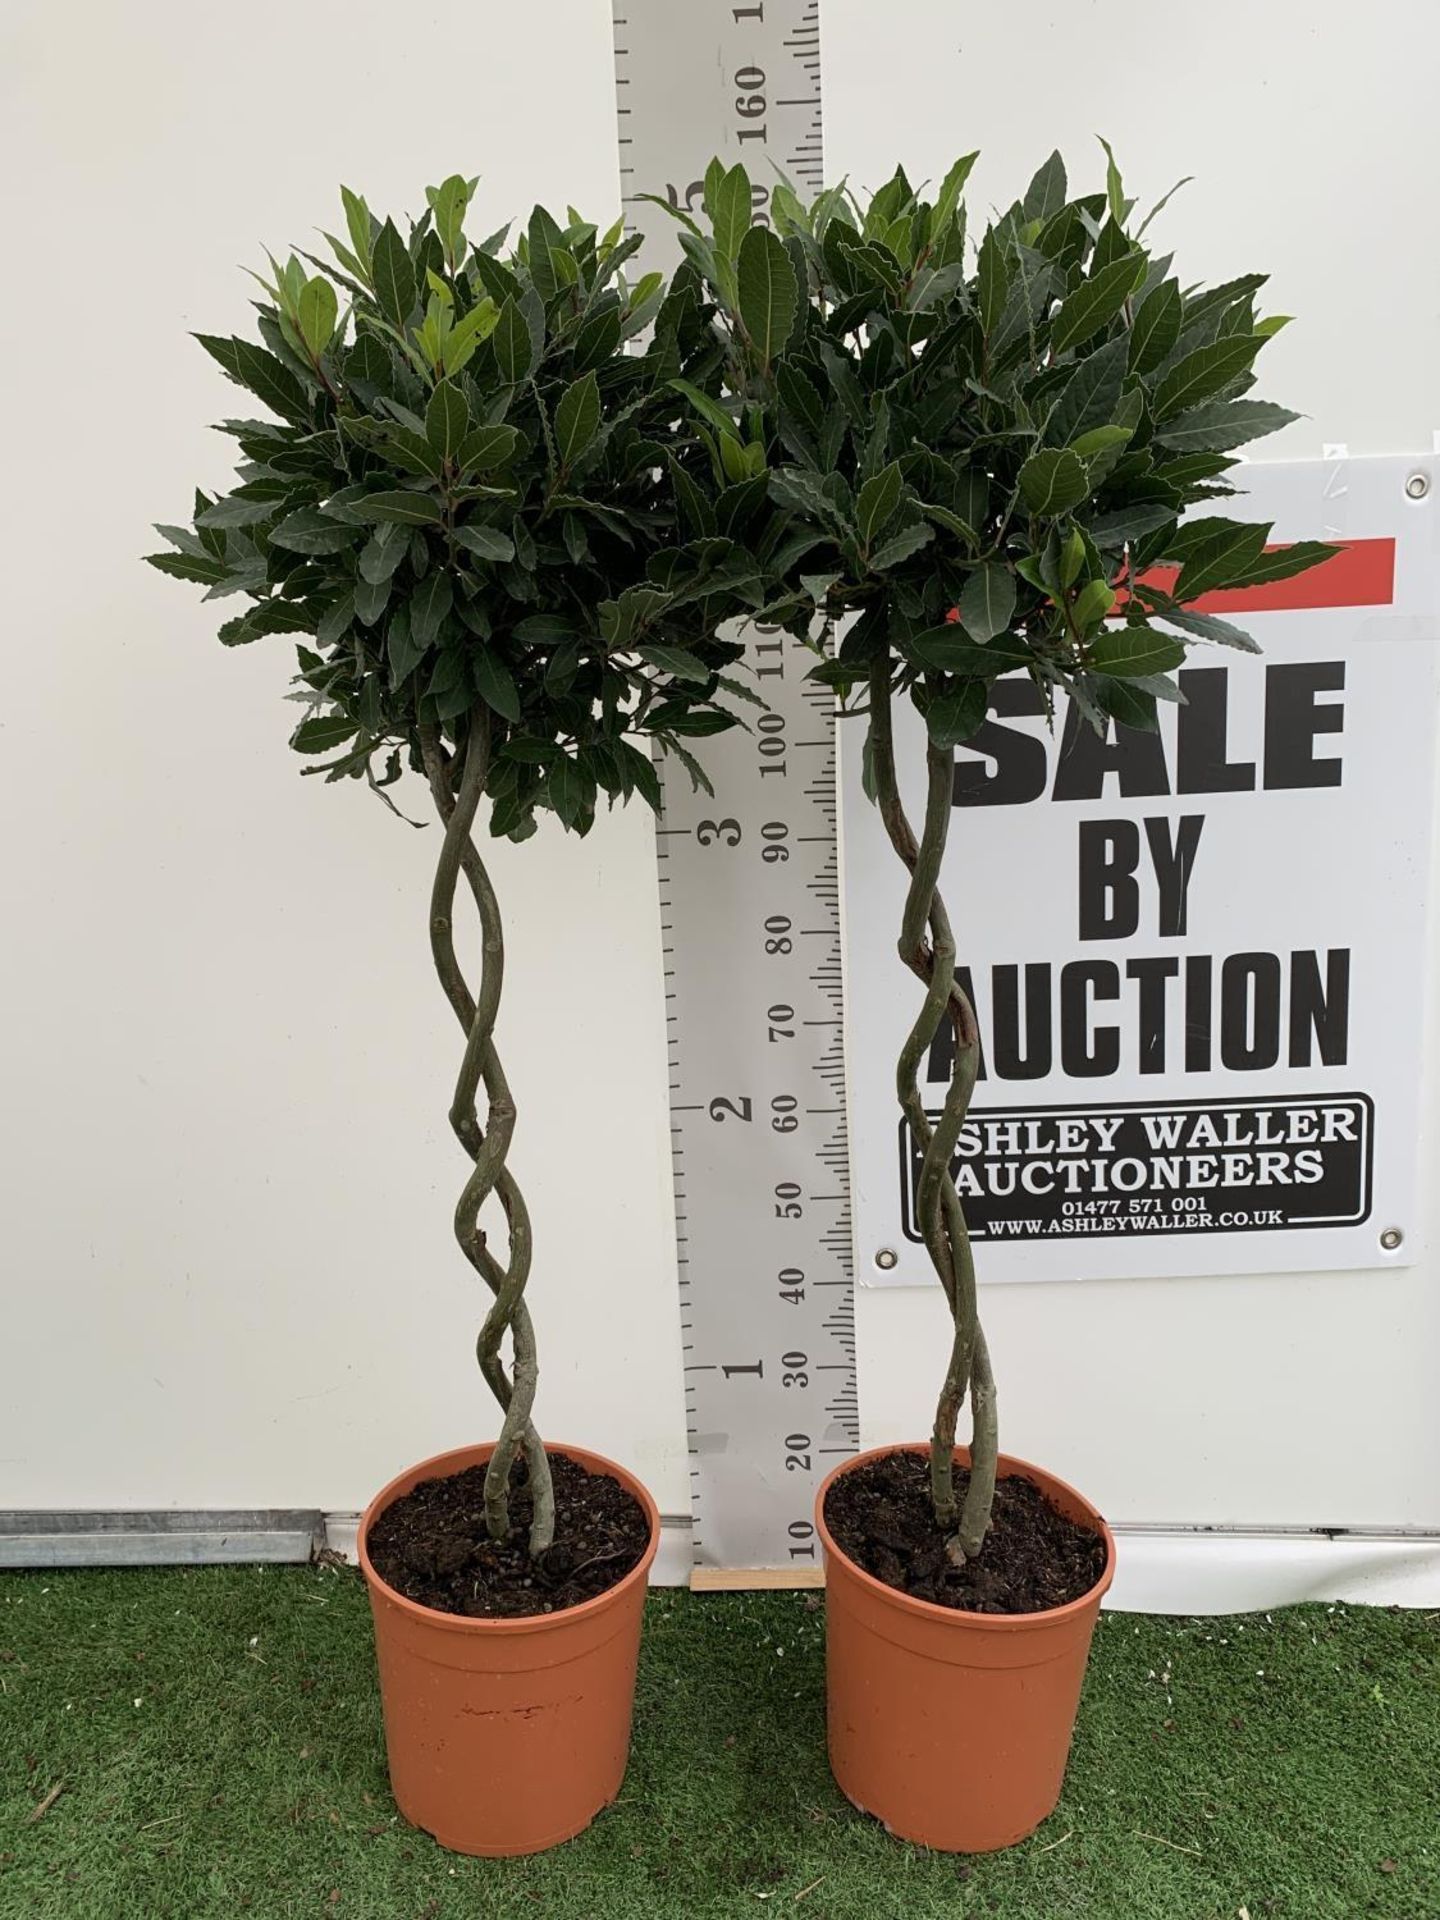 TWO DOUBLE SPIRAL LAURUS BAY TREES APPROX 150CM IN HEIGHT IN 7.5 LTR POTS PLUS VAT TO BE SOLD FOR - Image 4 of 8